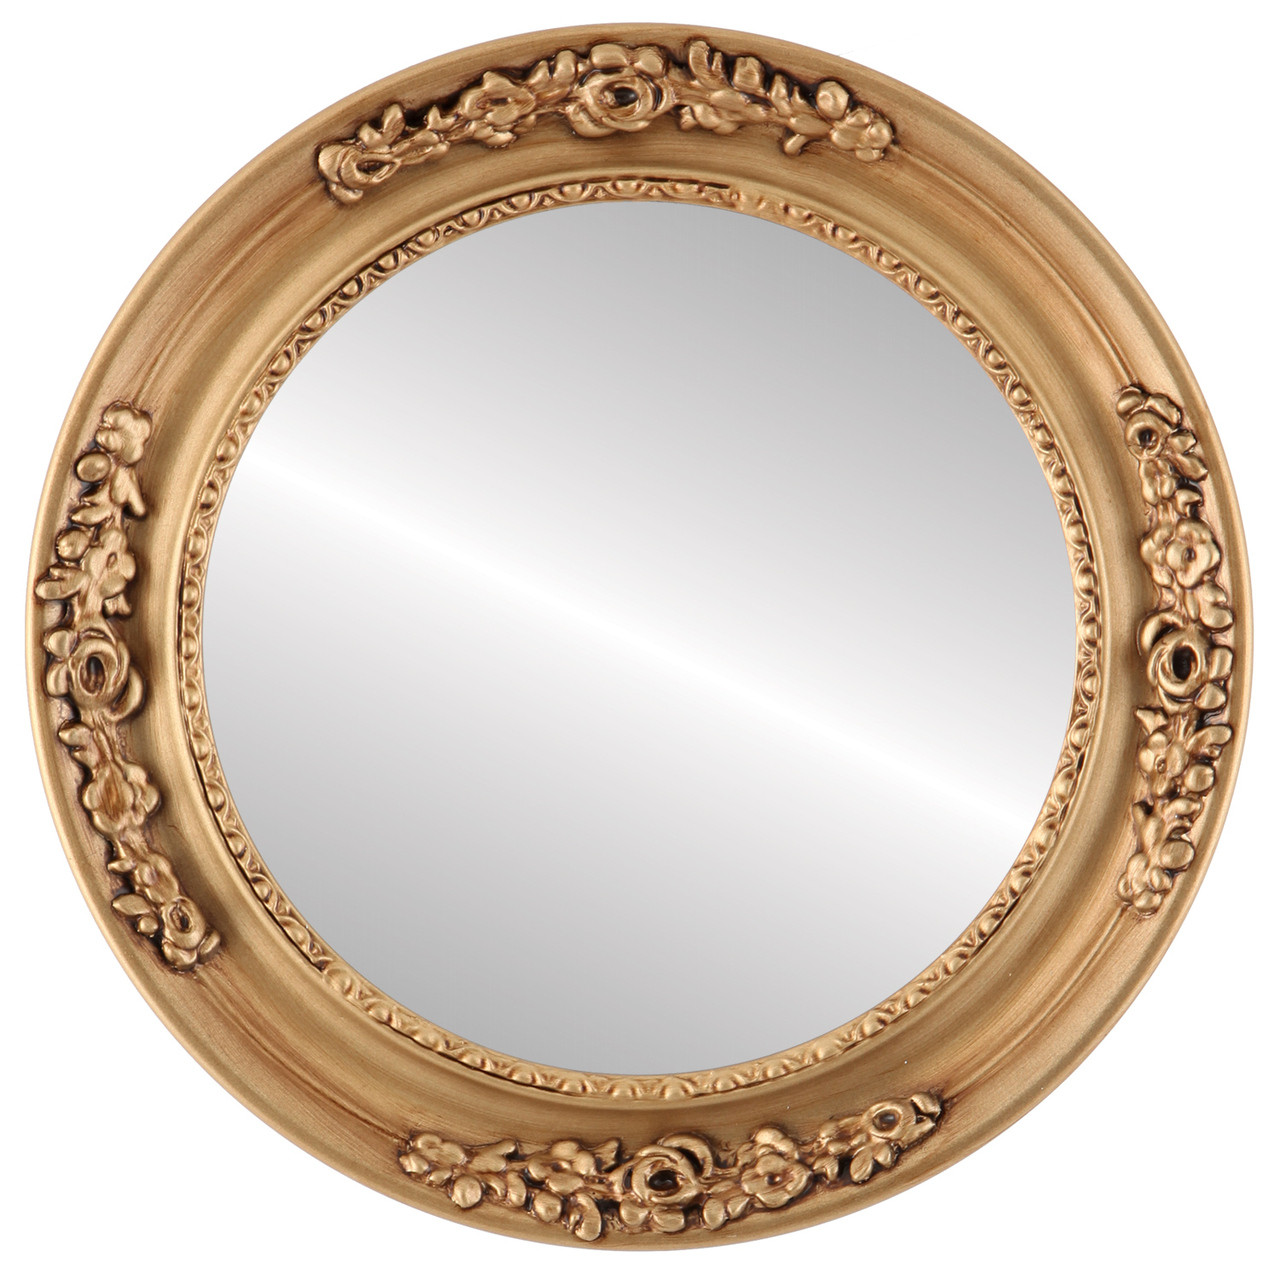 Vintage Gold Round Mirrors from $146 | Free Shipping